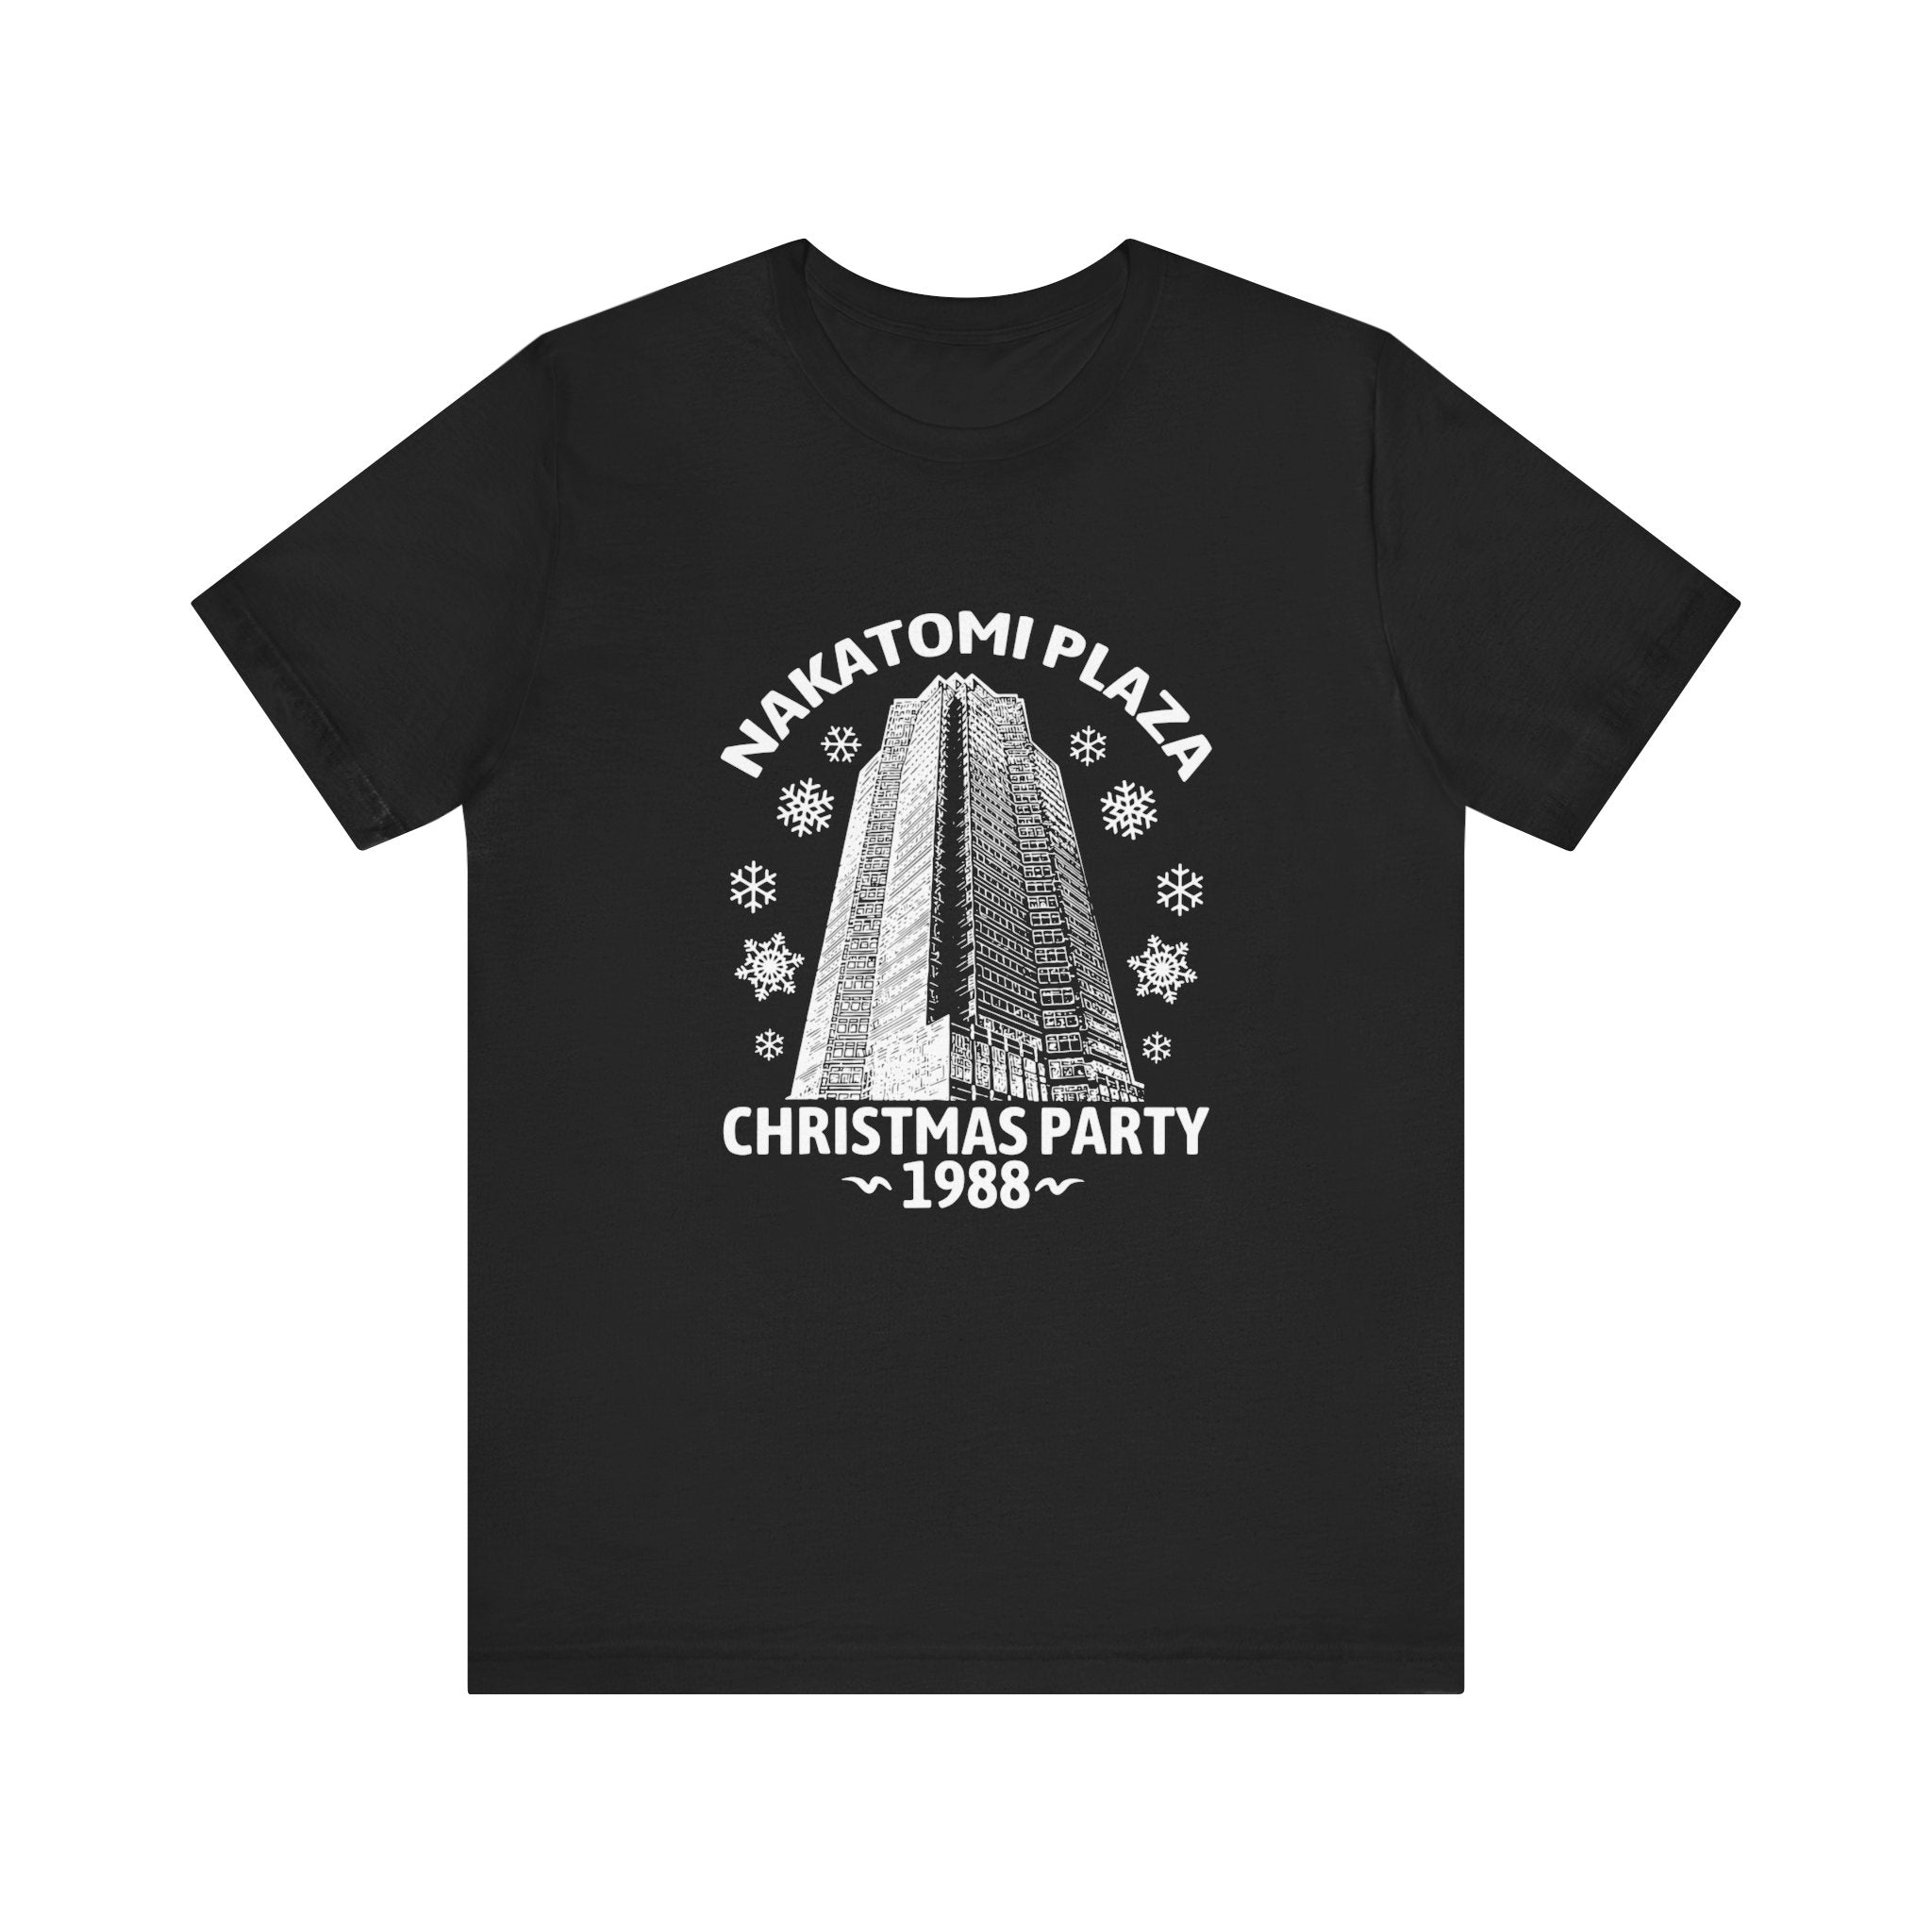 Nakatomi Plaza Christmas Party 1988 T-Shirt featuring a monochrome graphic of Nakatomi Plaza with snowflakes and text that reads "Nakatomi Plaza Christmas Party 1988", crafted from breathable cotton.